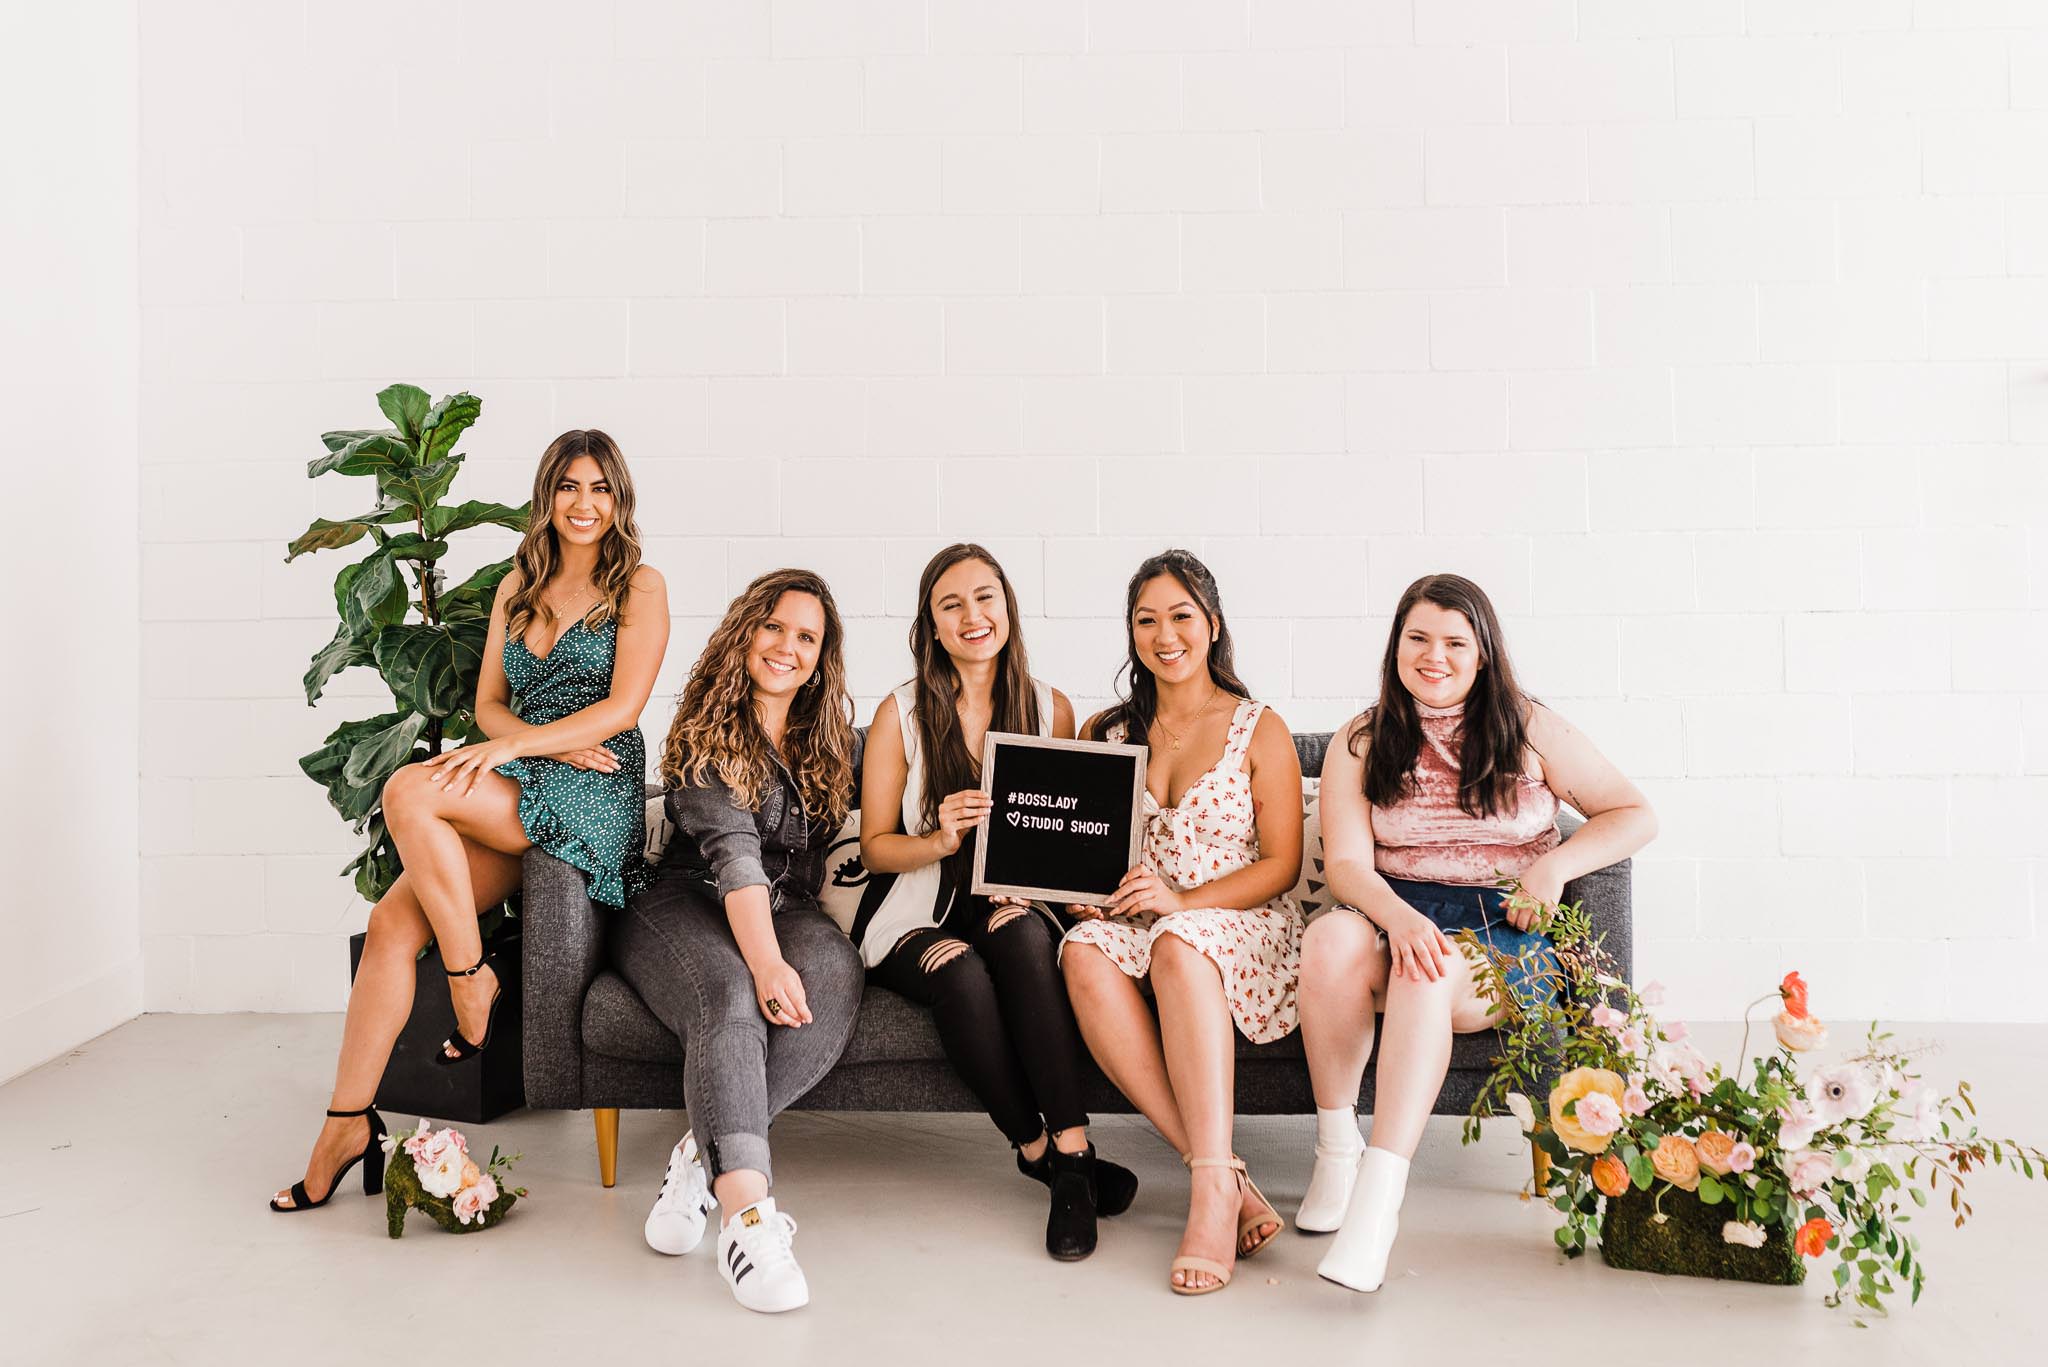 Group shot of everyone sitting on the couch holding a sign that says "#BossLady Studio Shoot."